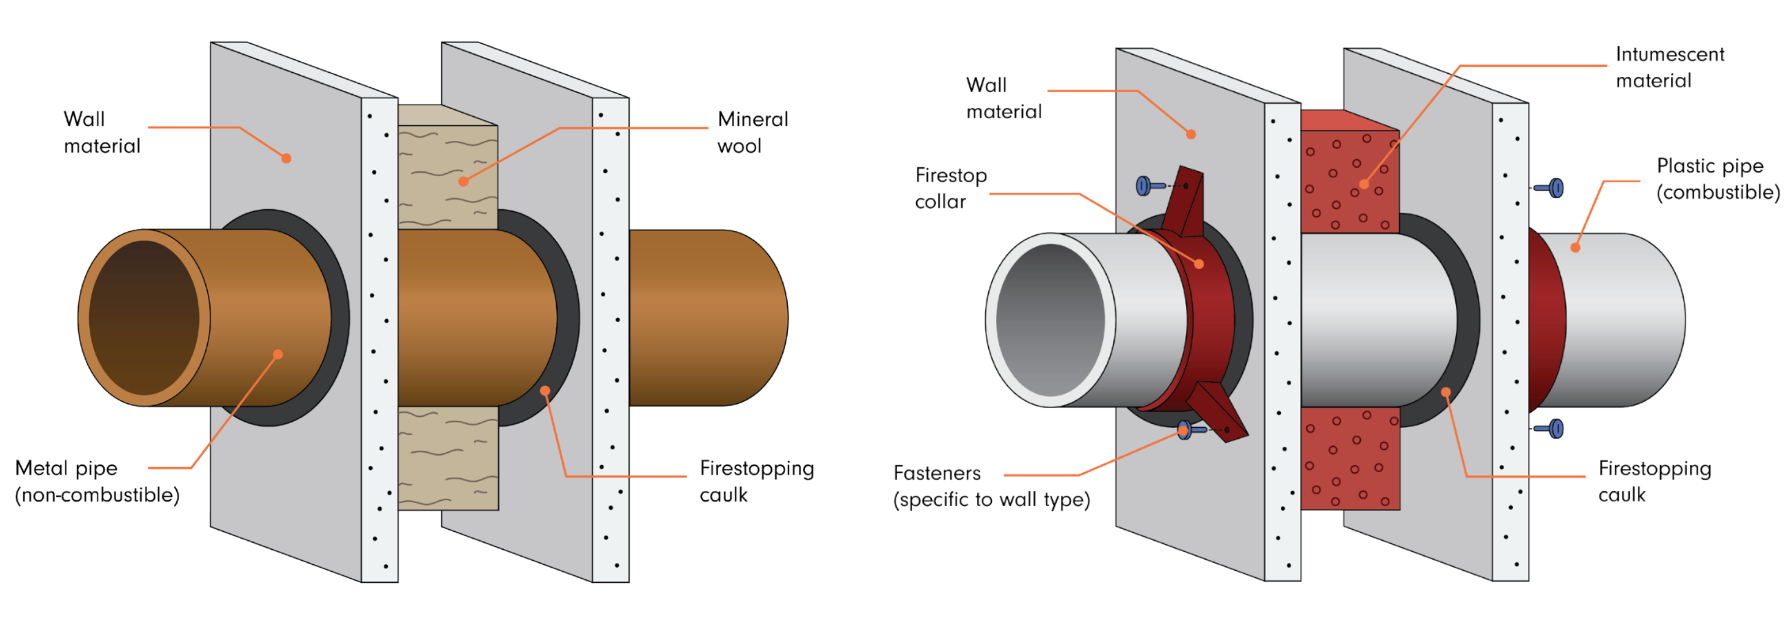 A diagram from Safe Piping Matters on the typical firestop assemblies for metal and plastic pipes.